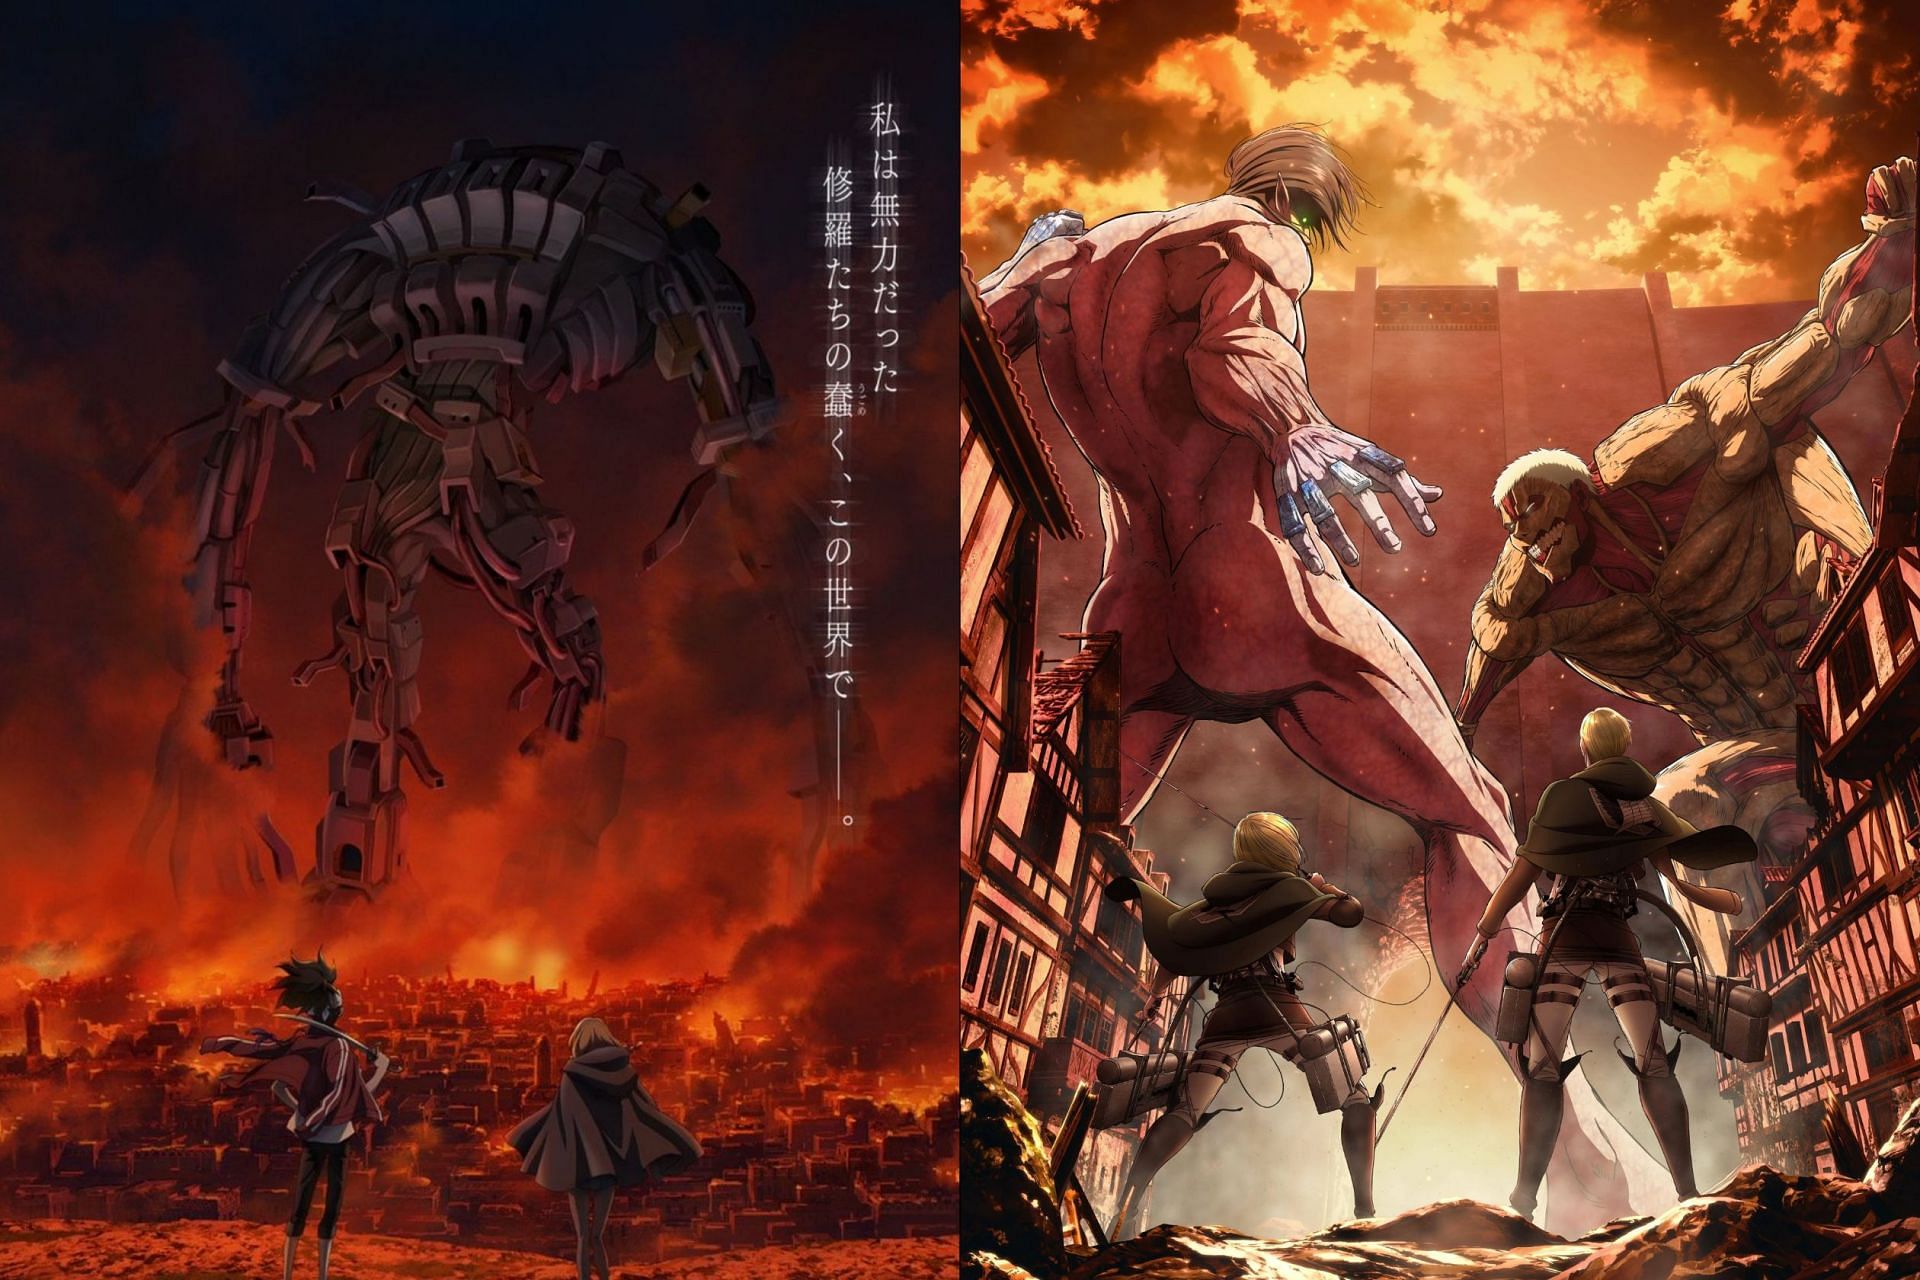 The official key visuals of Ishura and Attack on Titan (Image via Sportskeeda)